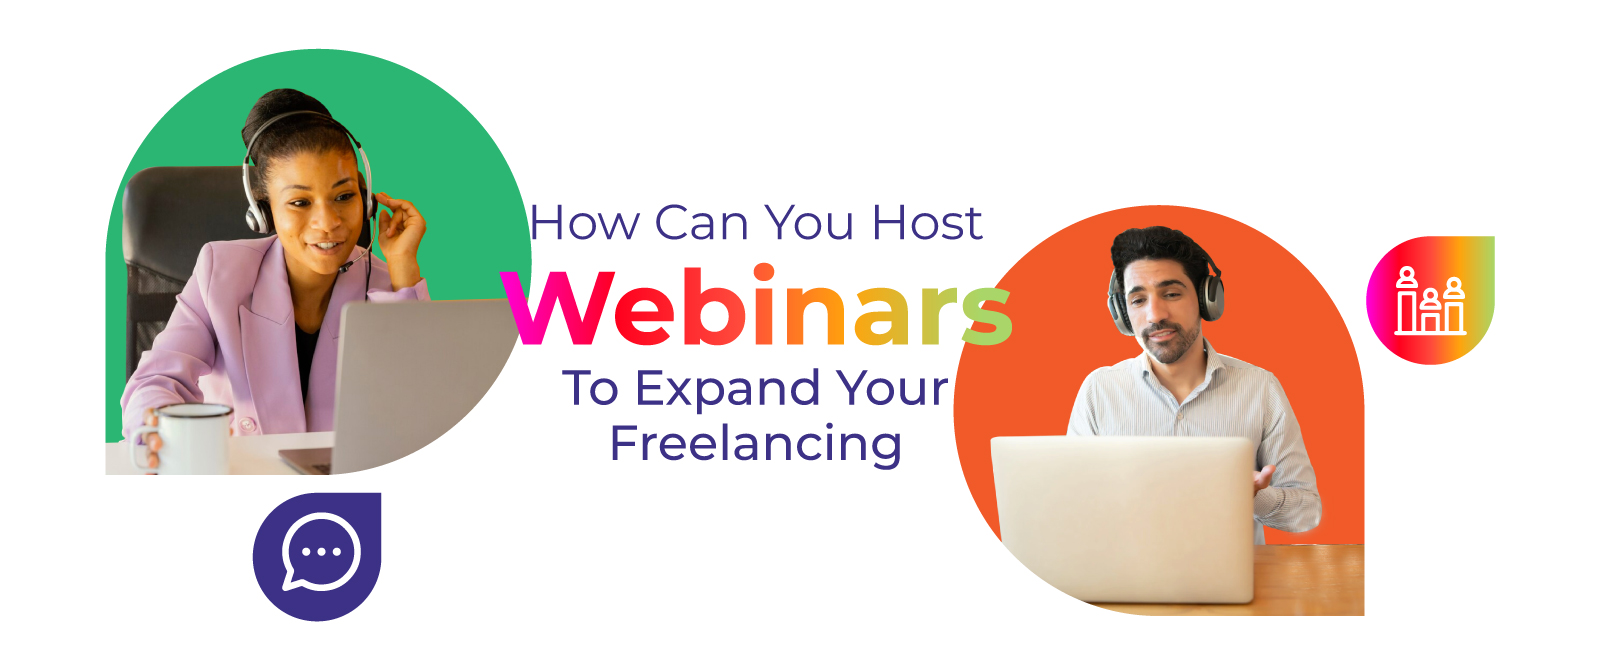 How Can You Host Webinars to Expand Your Freelancing